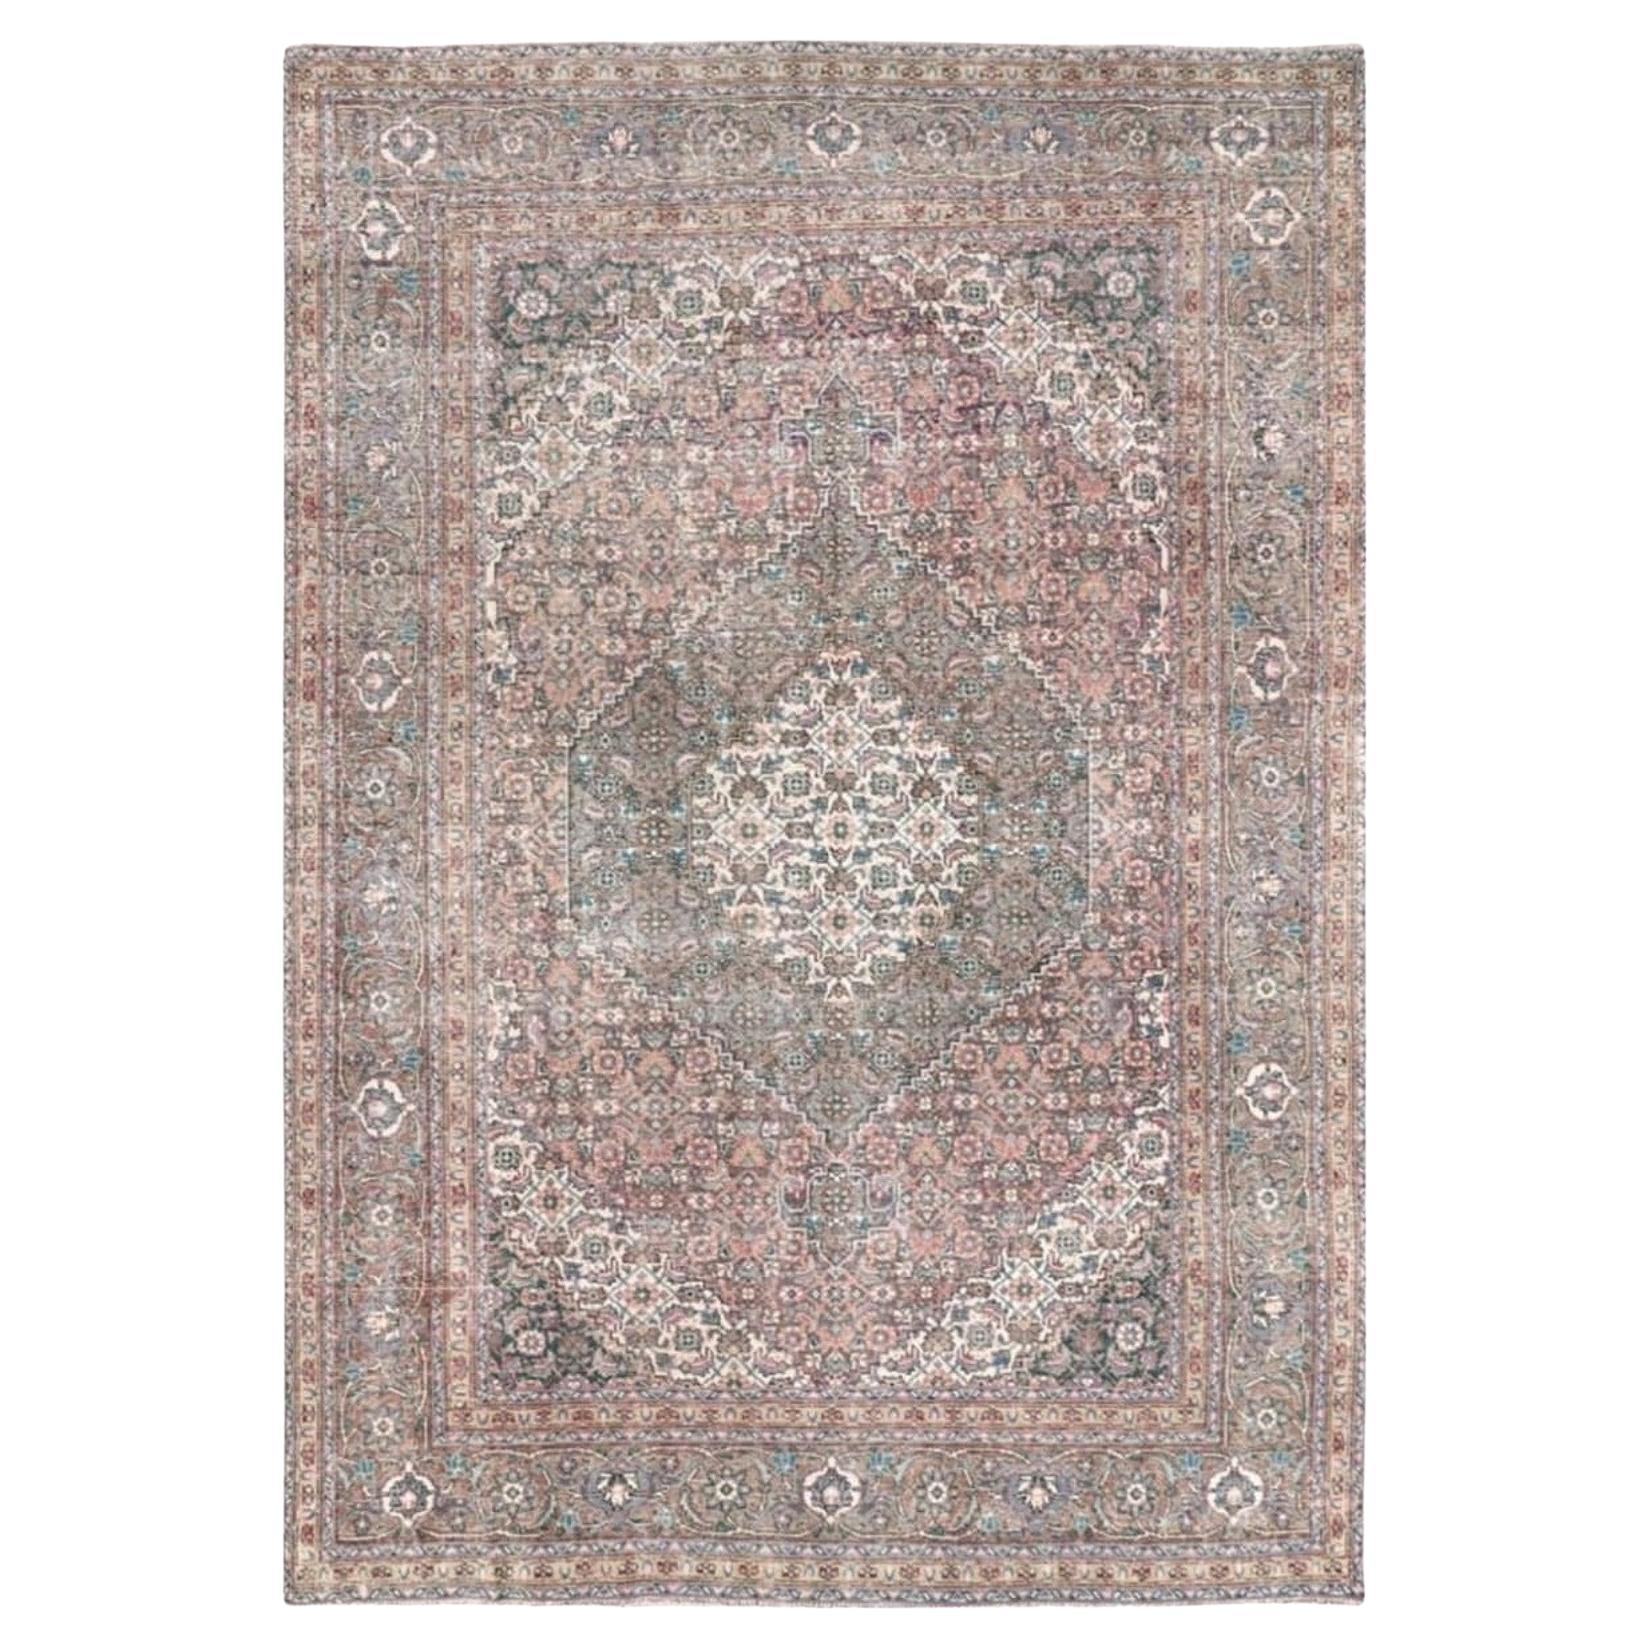  Tabriz Vintage Rug 8x12 ft Hand Knotted Room Size Wool Muted Colors 360x250 cm